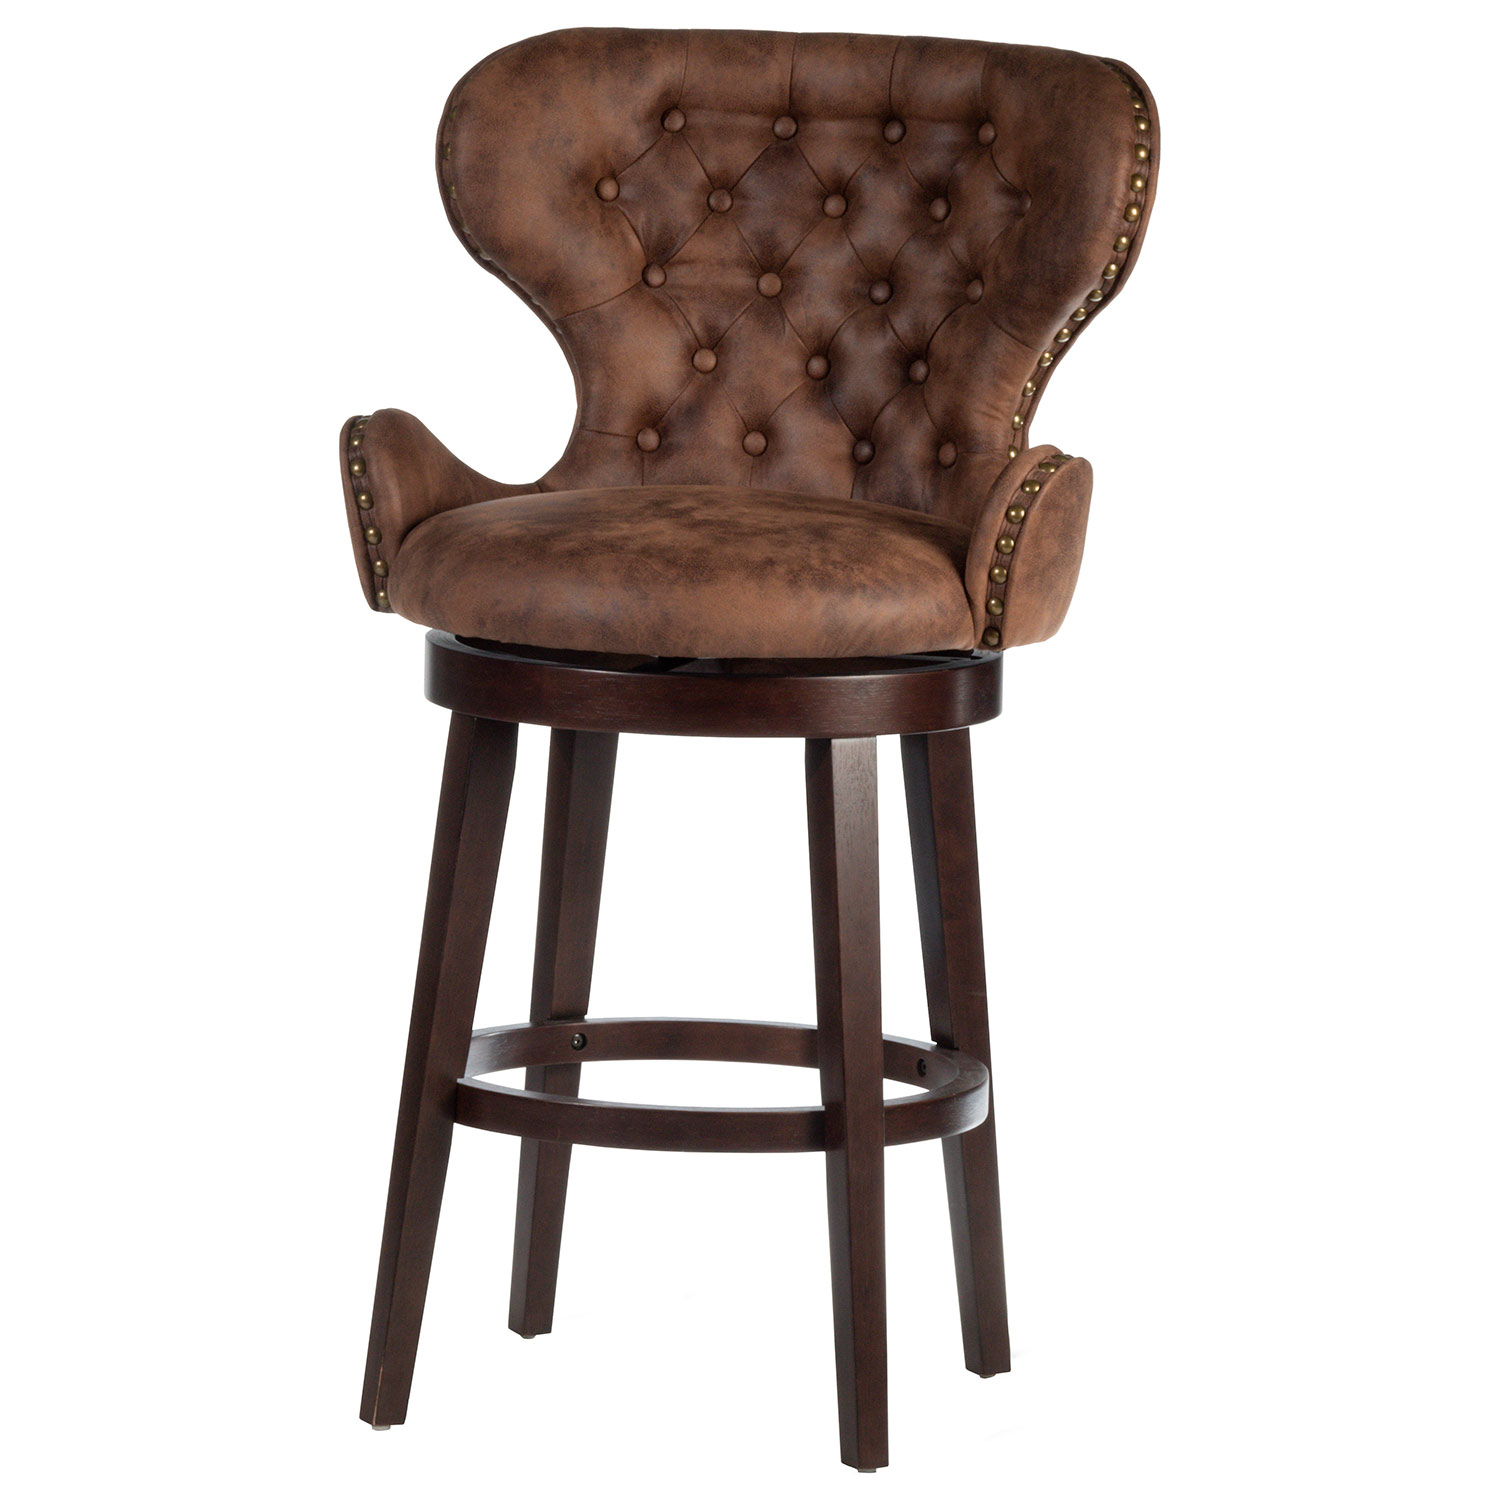 Hillsdale Mid-City Wood and Upholstered Swivel Bar Height Stool - Chocolate